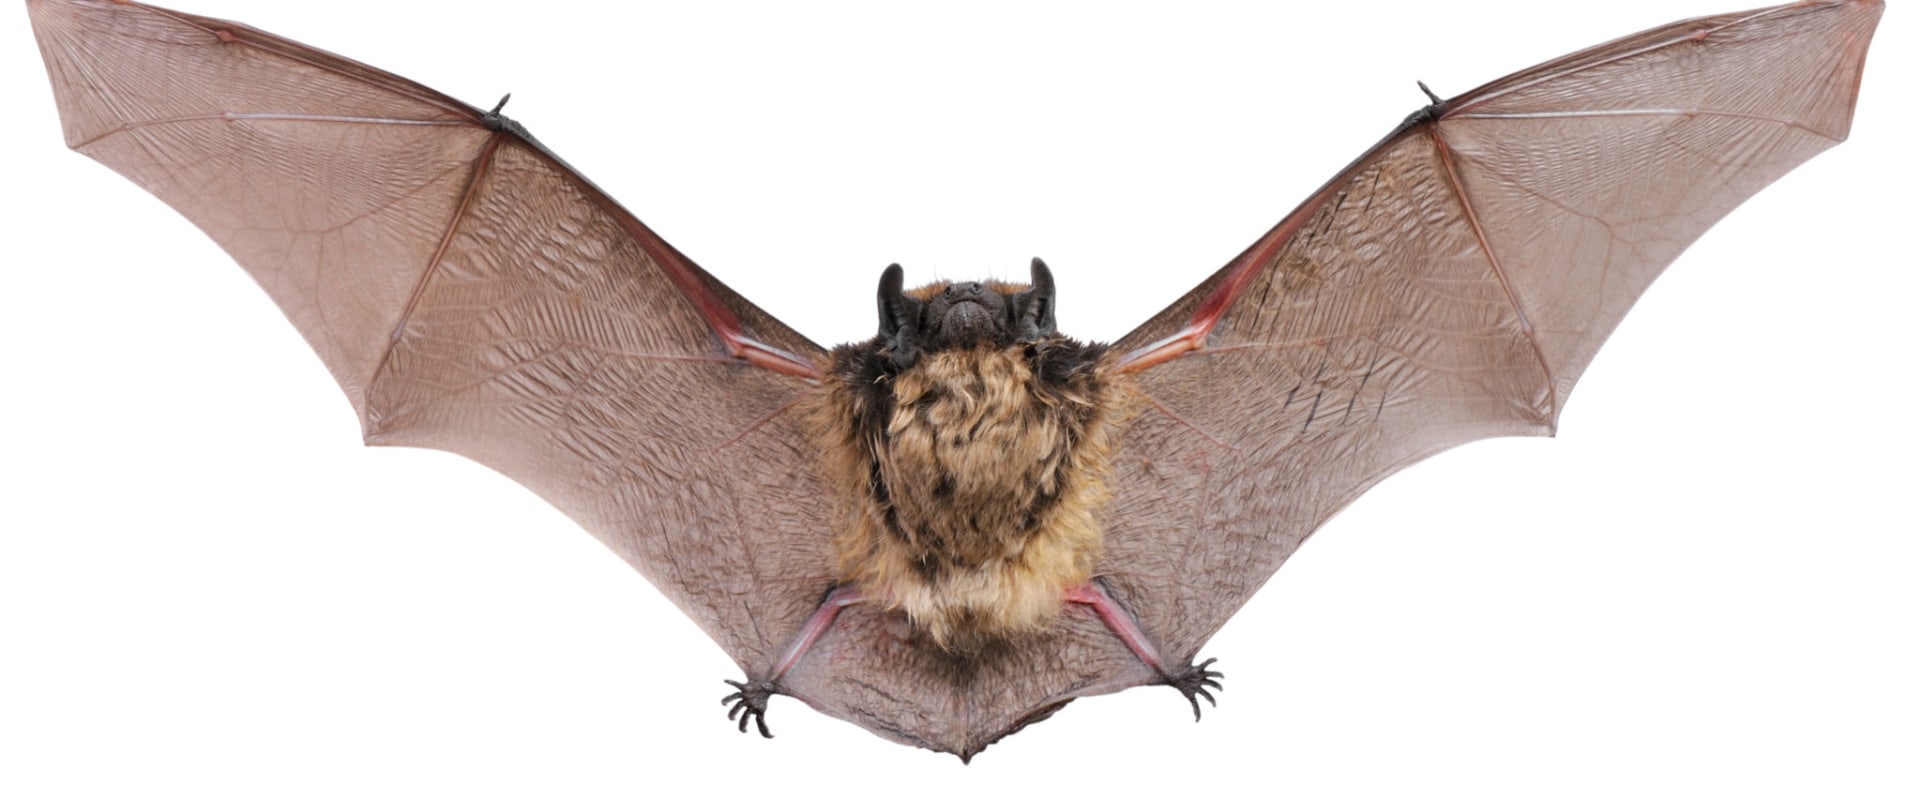 How long will a bat stay in one place?